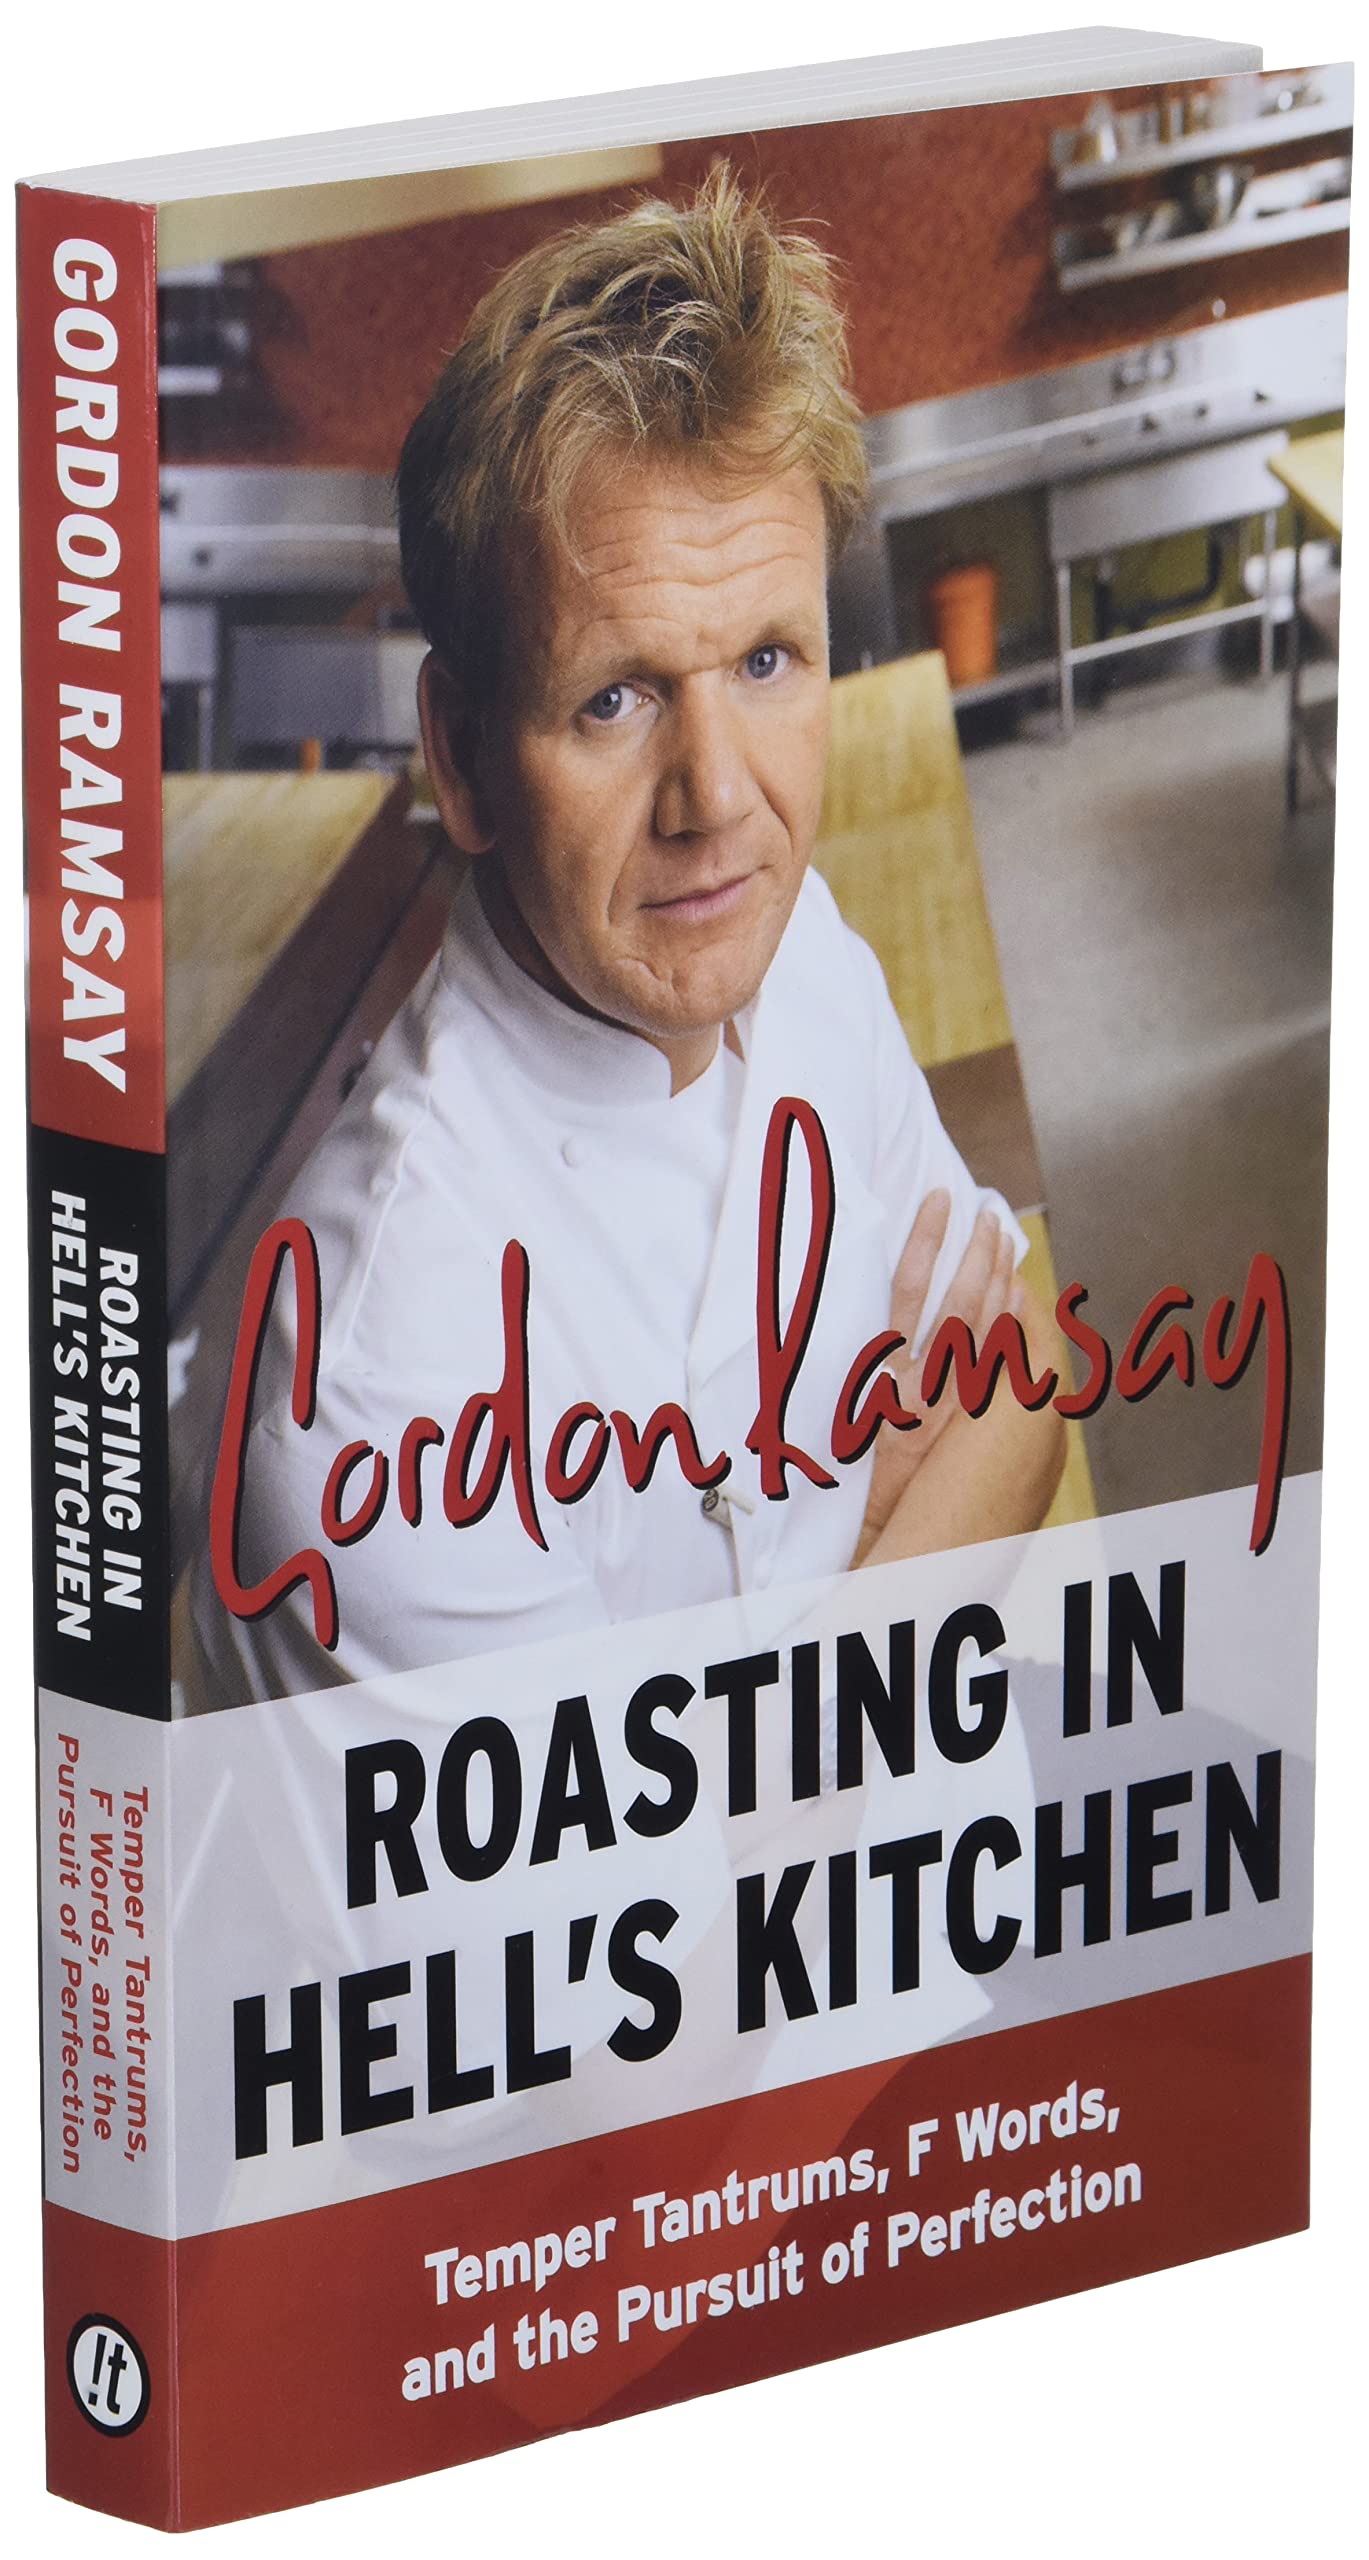 Roasting in Hell's Kitchen: Temper Tantrums, F Words, and the Pursuit of Perfection